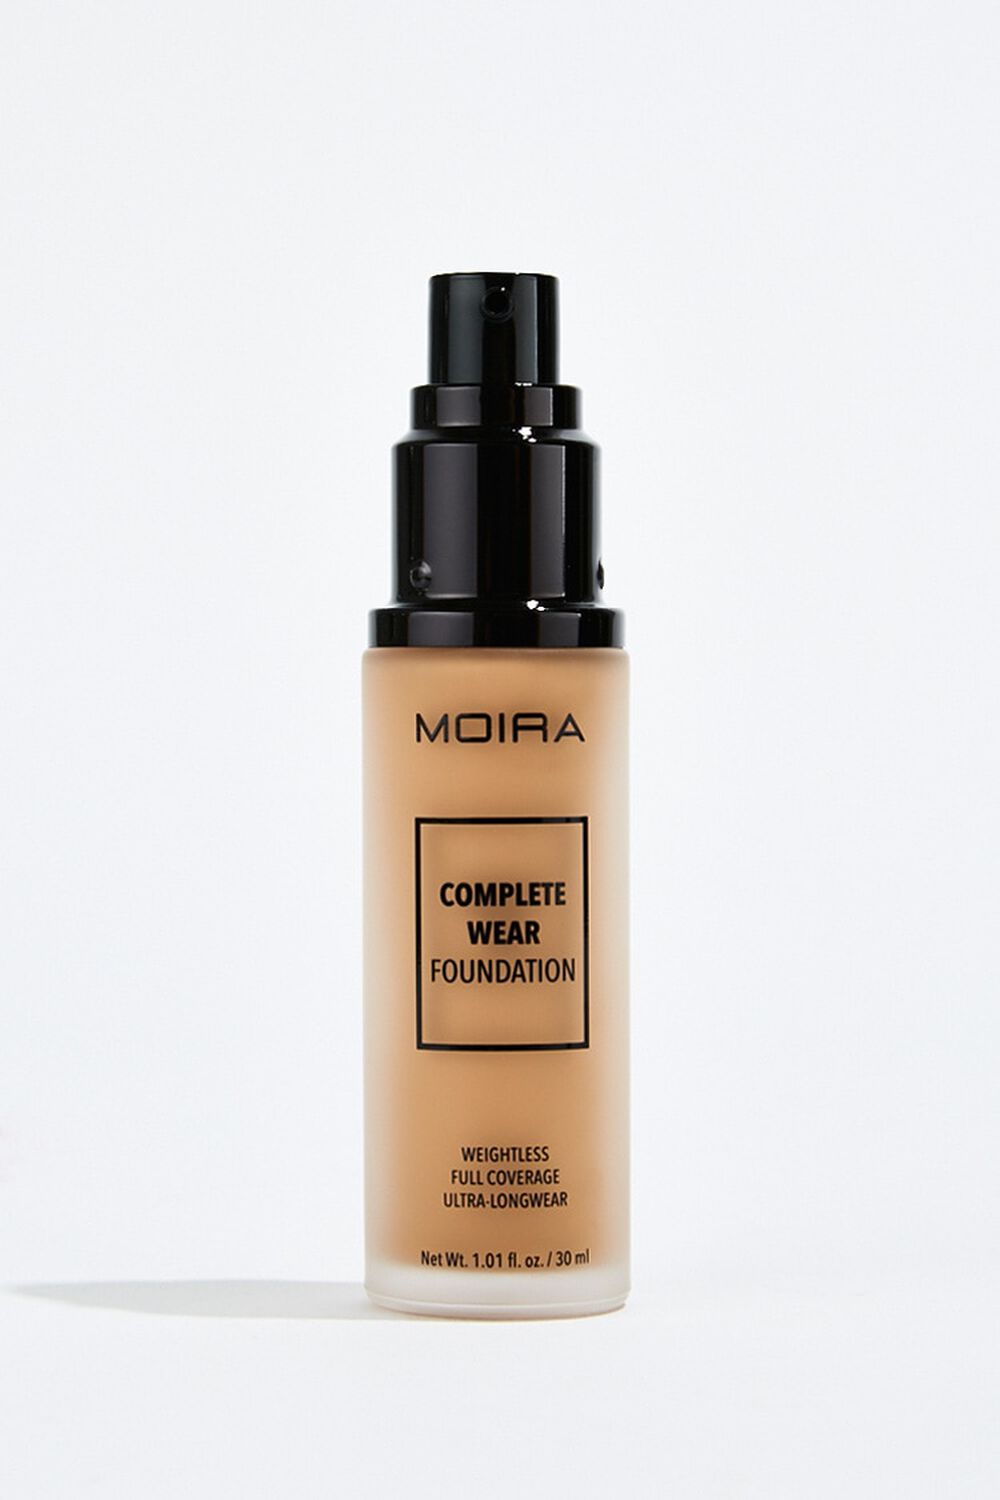 MOIRA Complete Wear Foundation, image 2